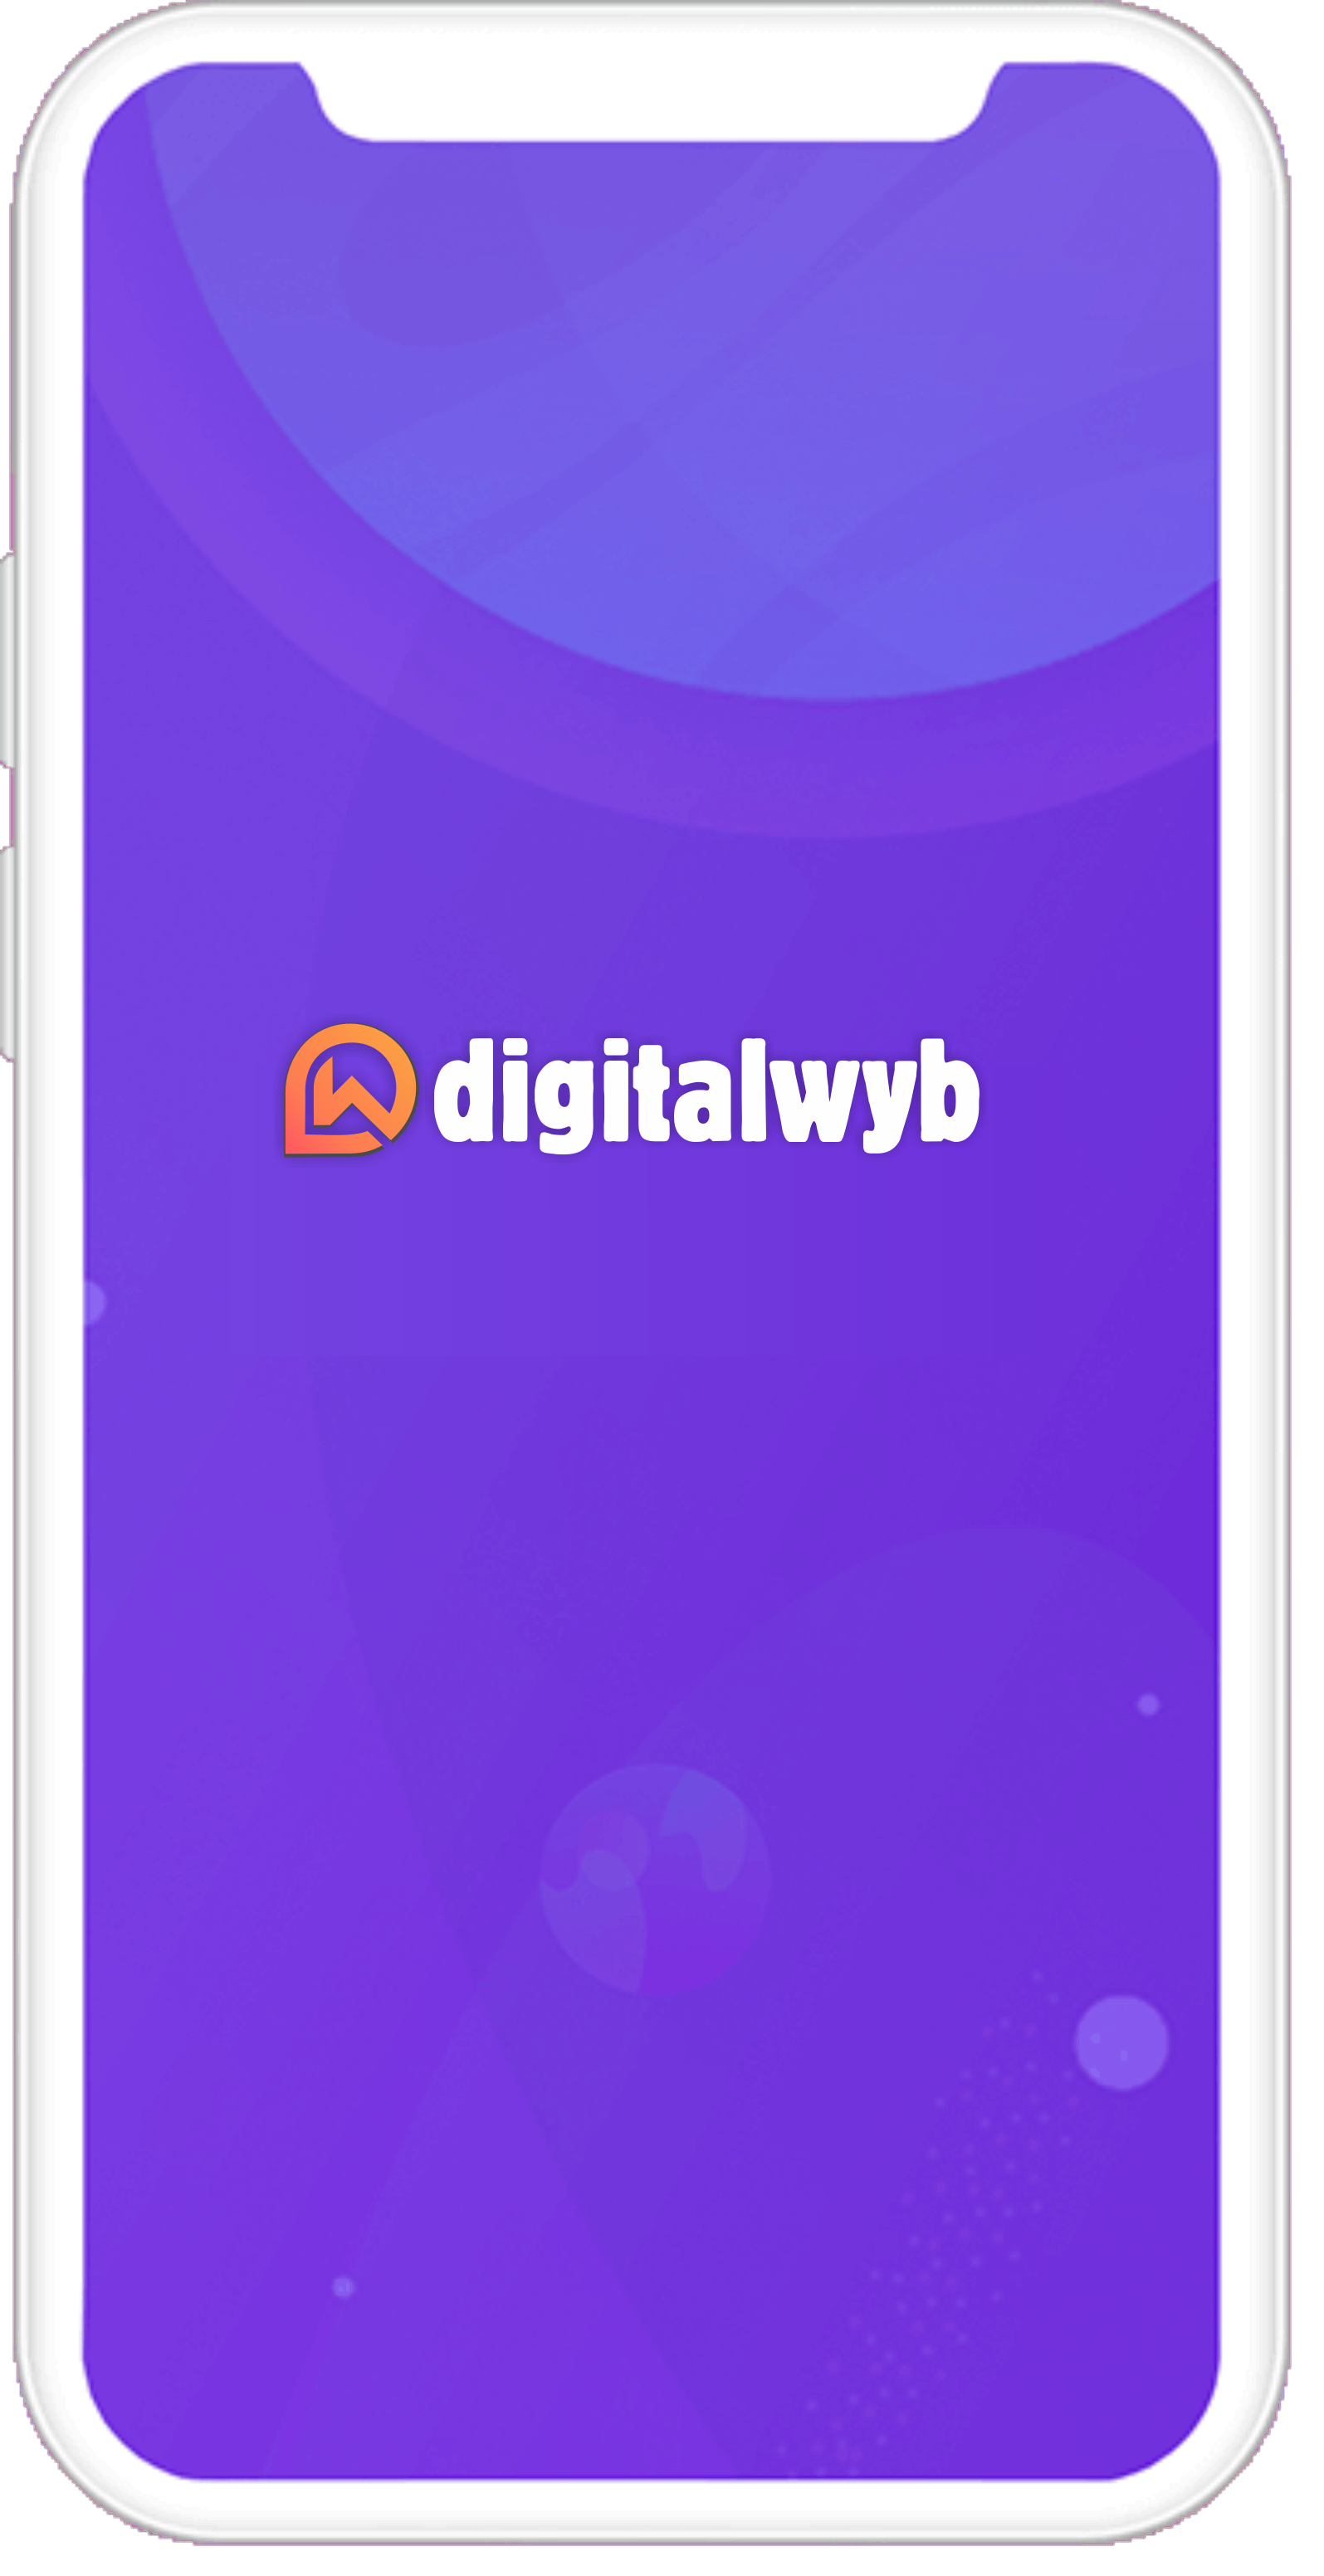 Best #1 Digital Marketing Company & SEO Agency In Goa, digitalwyb.com help your business achieve better online visibility, rank your business